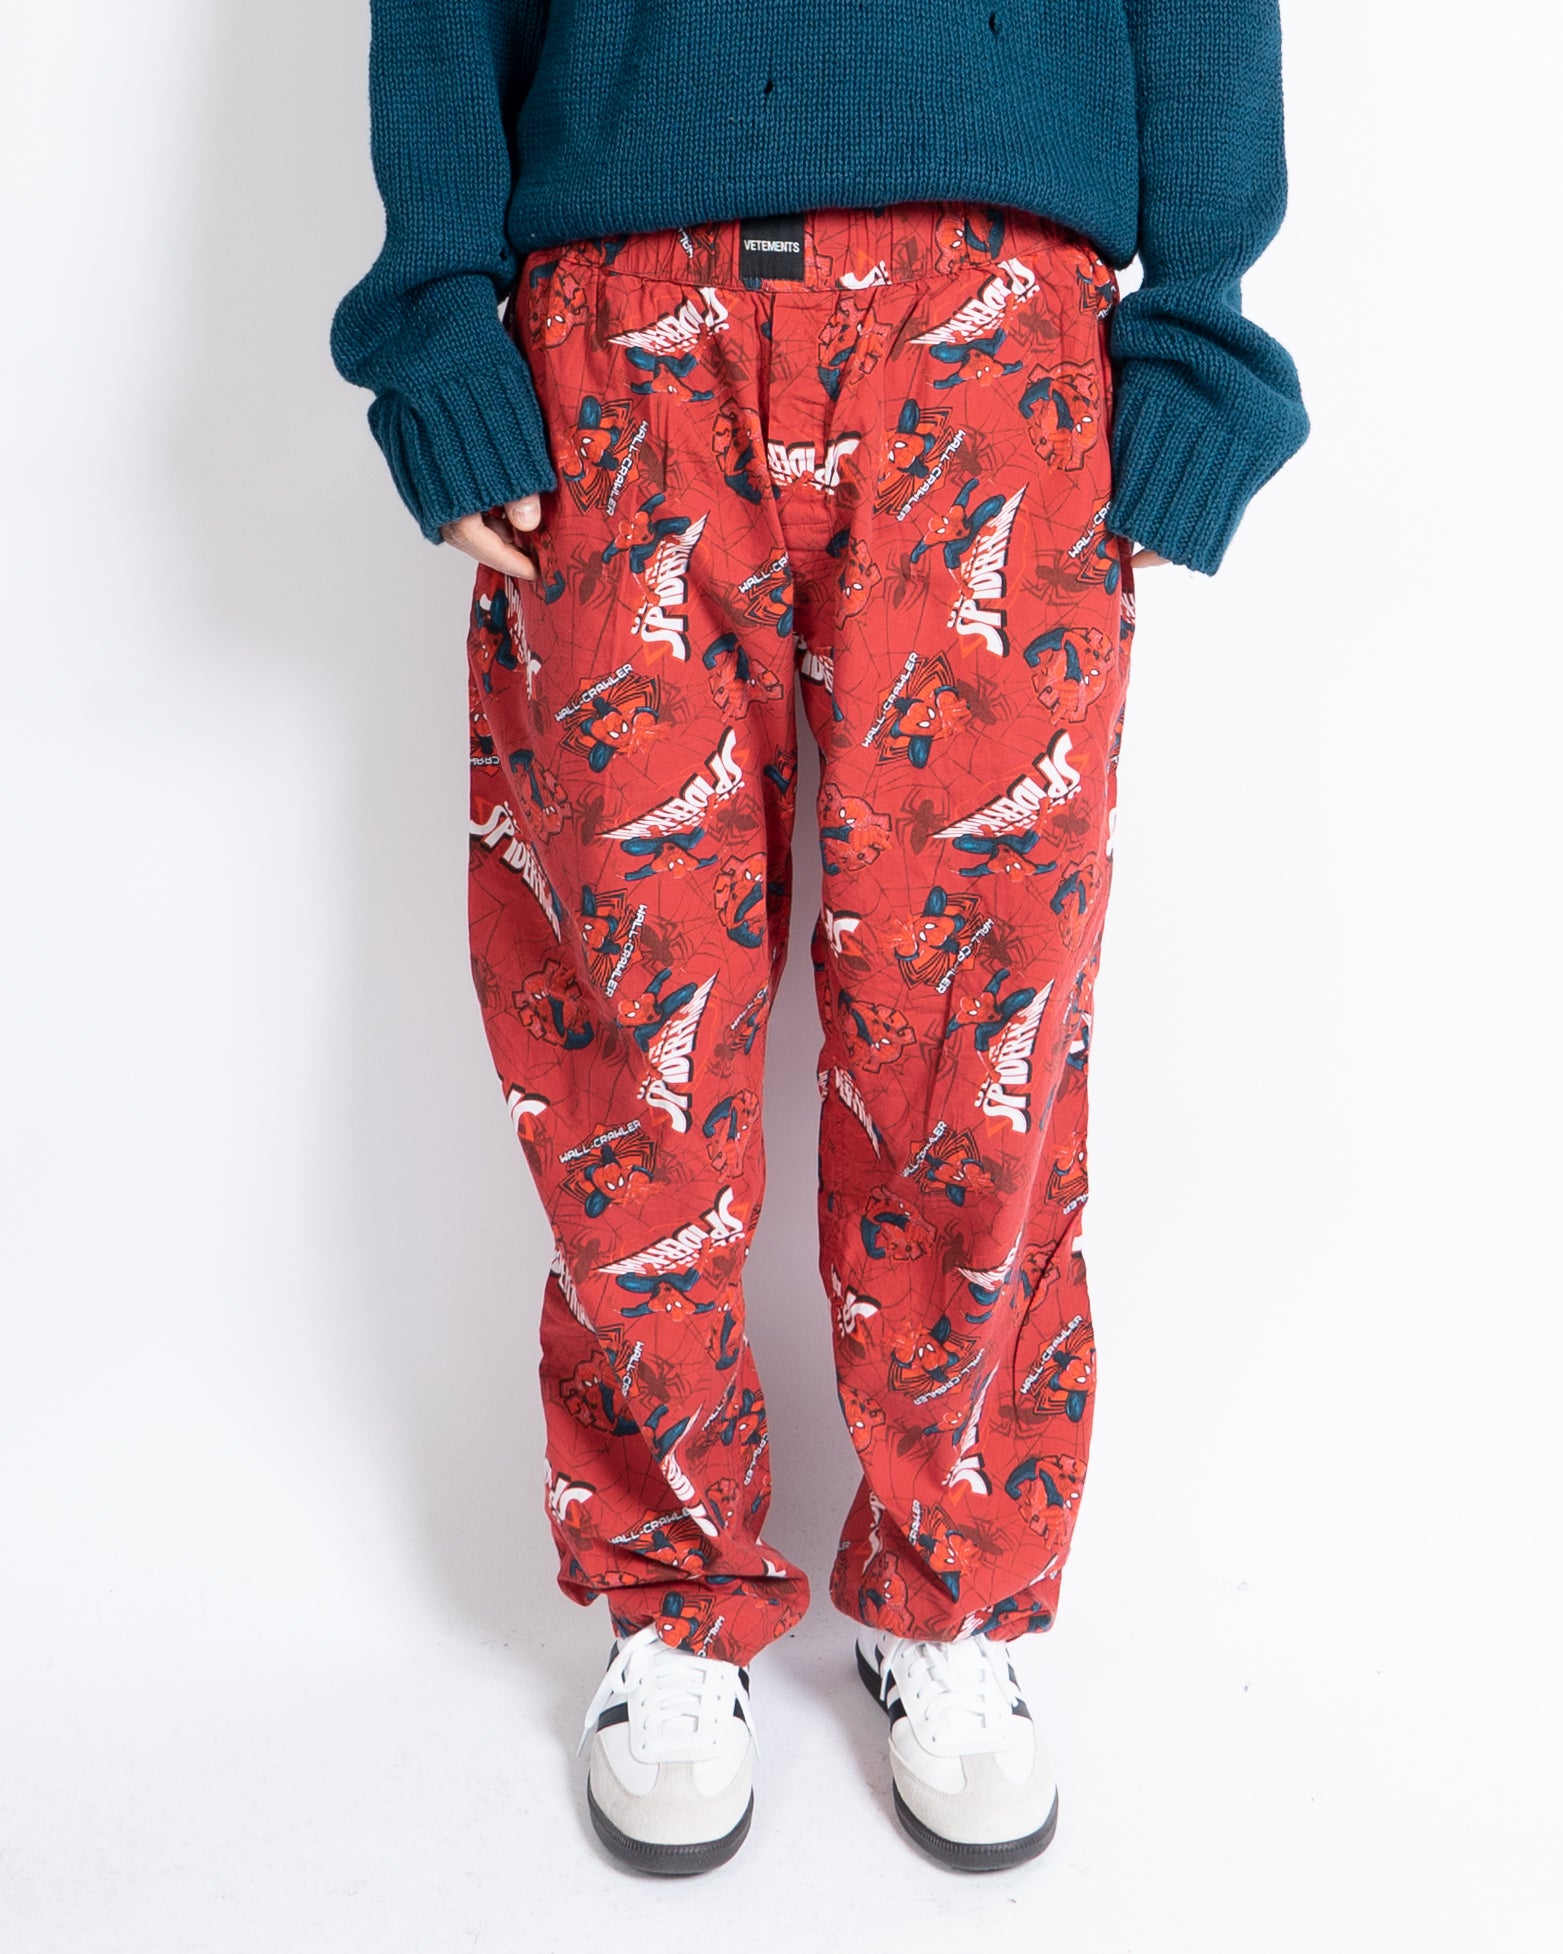 FW18 Spider Man Trousers